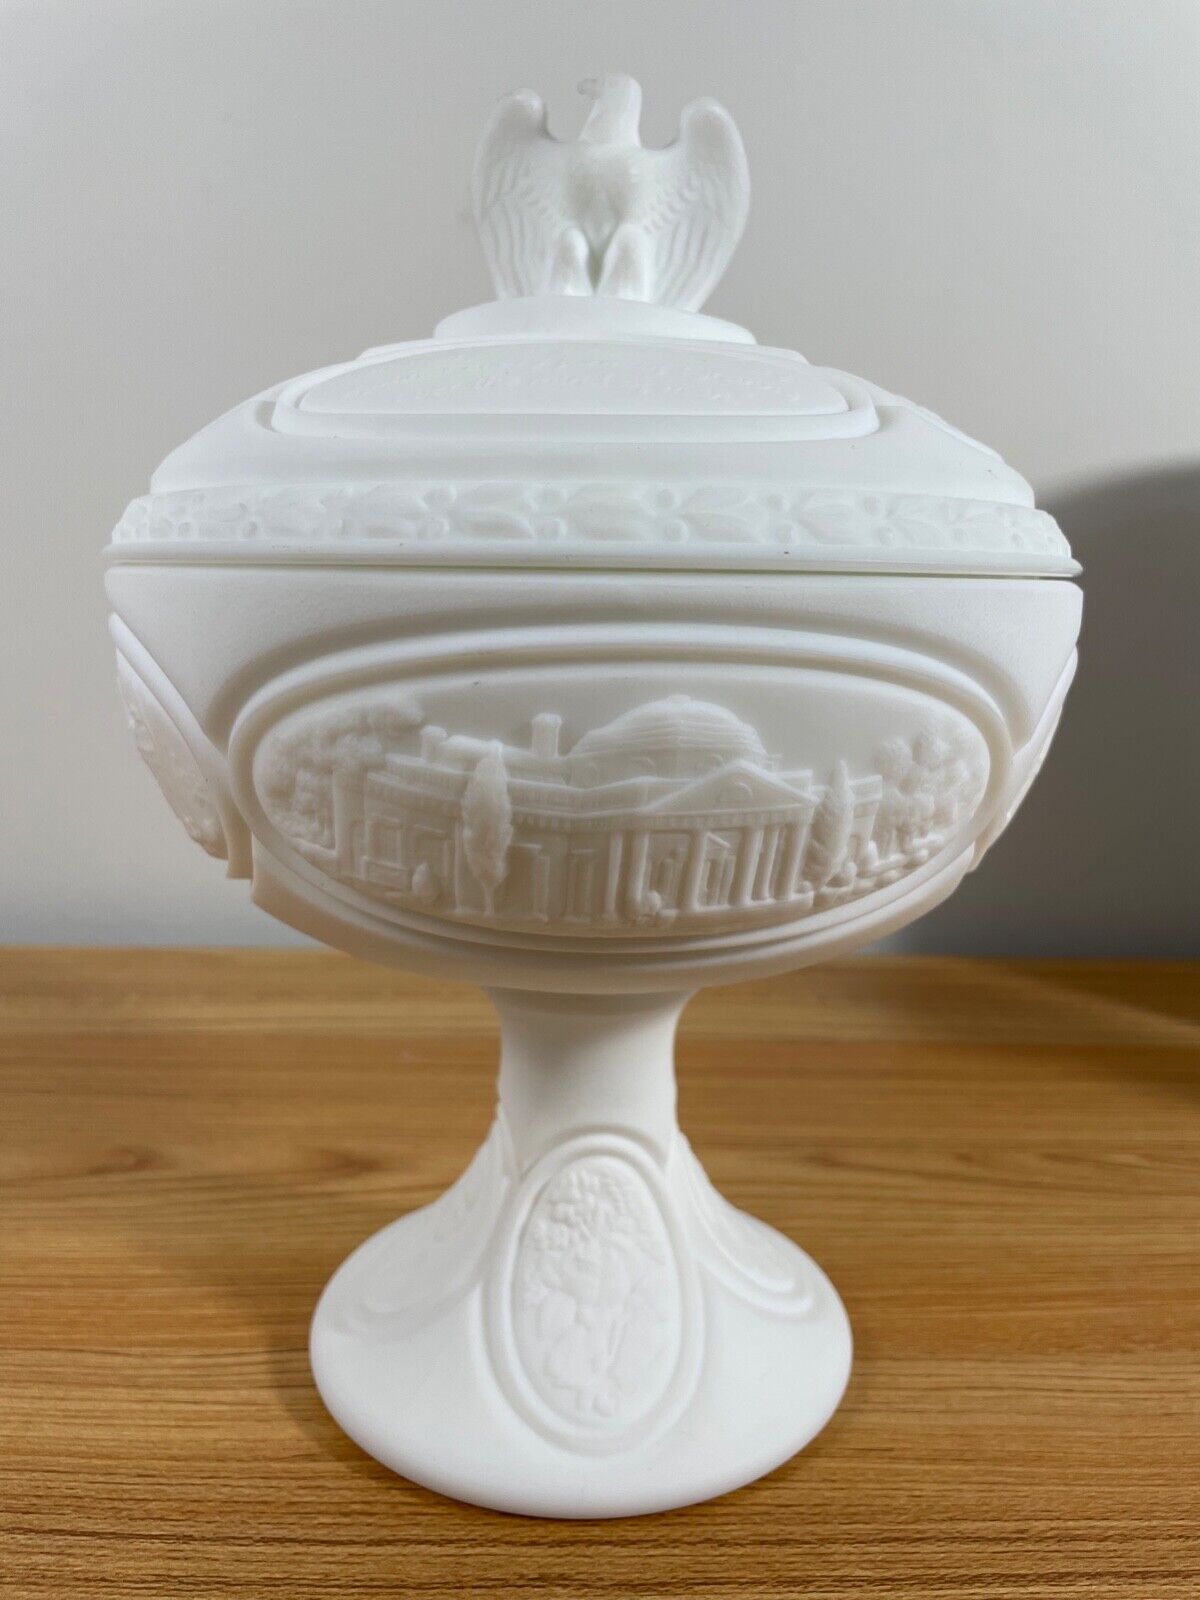 Vintage Fenton Glass Bicentennial Compote With Eagle Finial Lid White Milk Glass